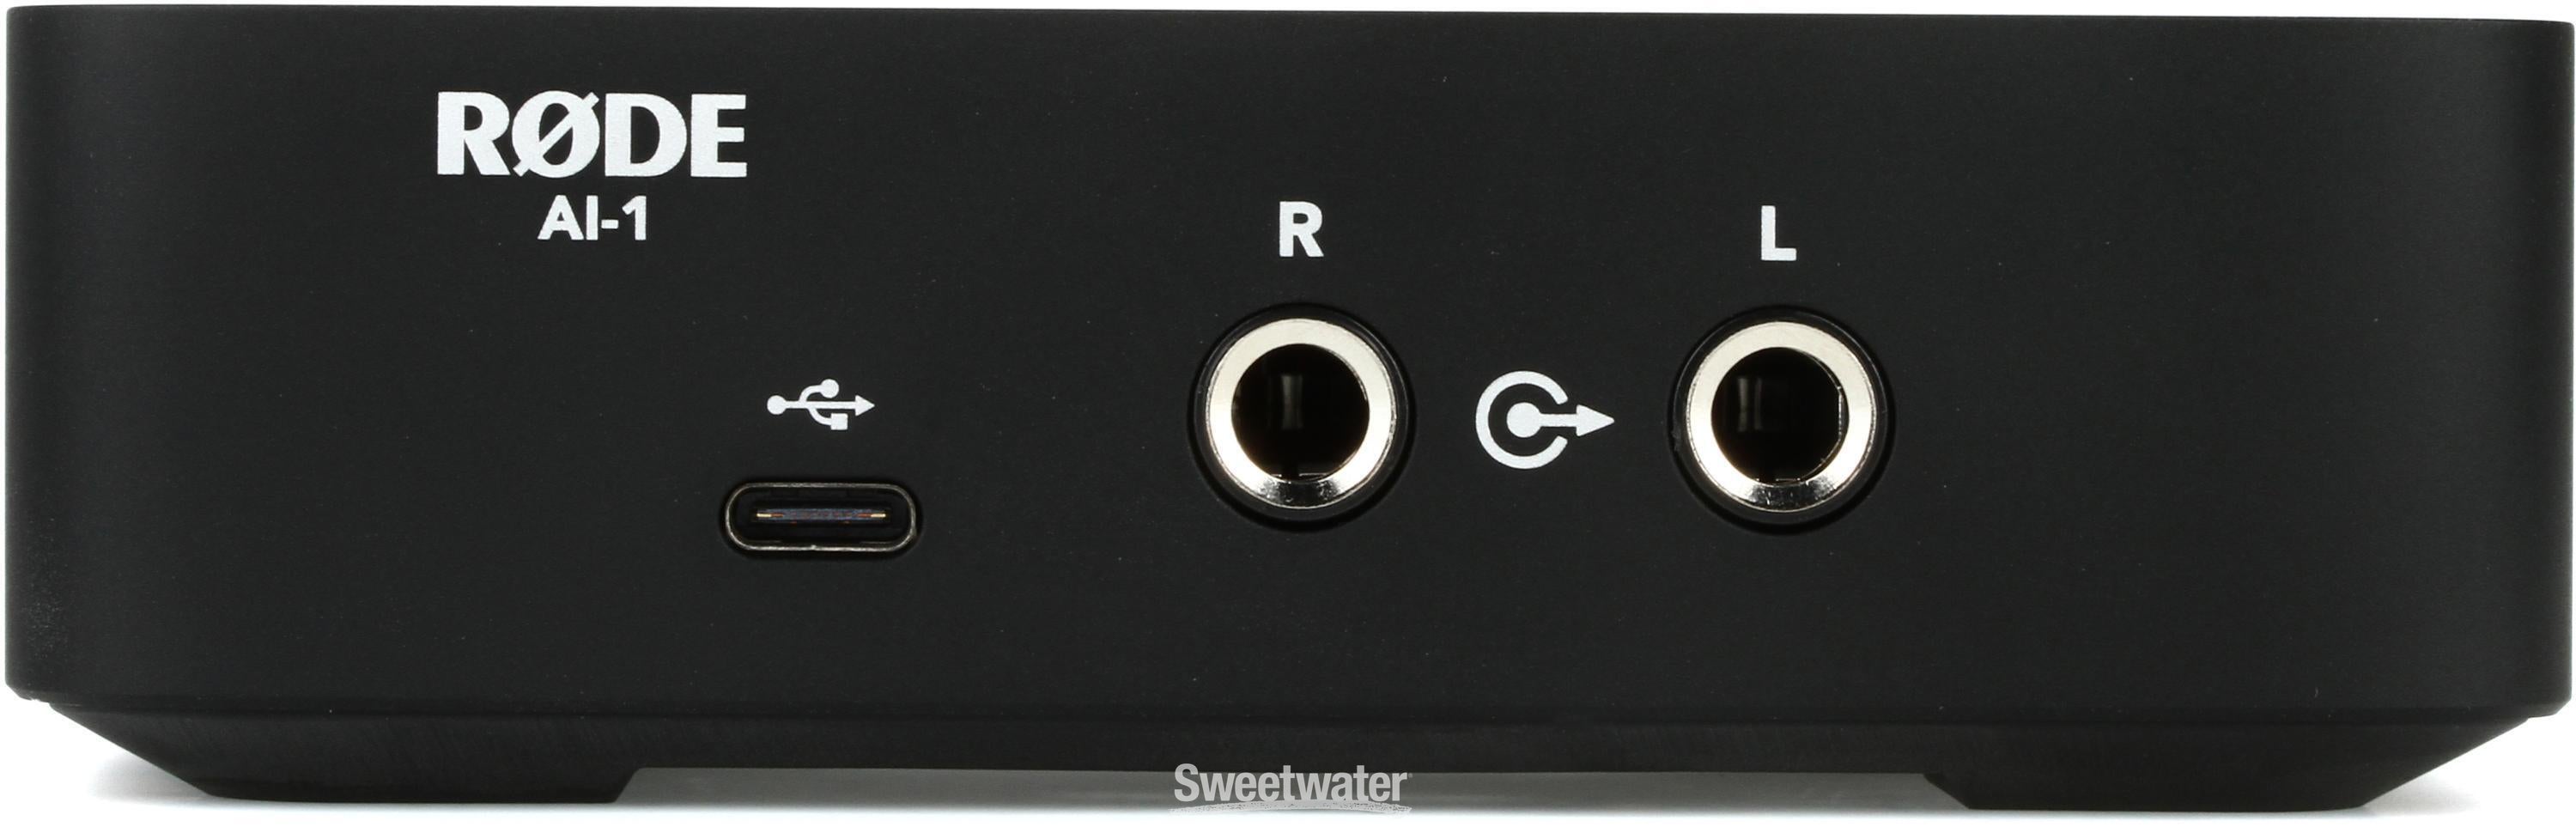 Rode AI-1 USB Audio Interface | Sweetwater